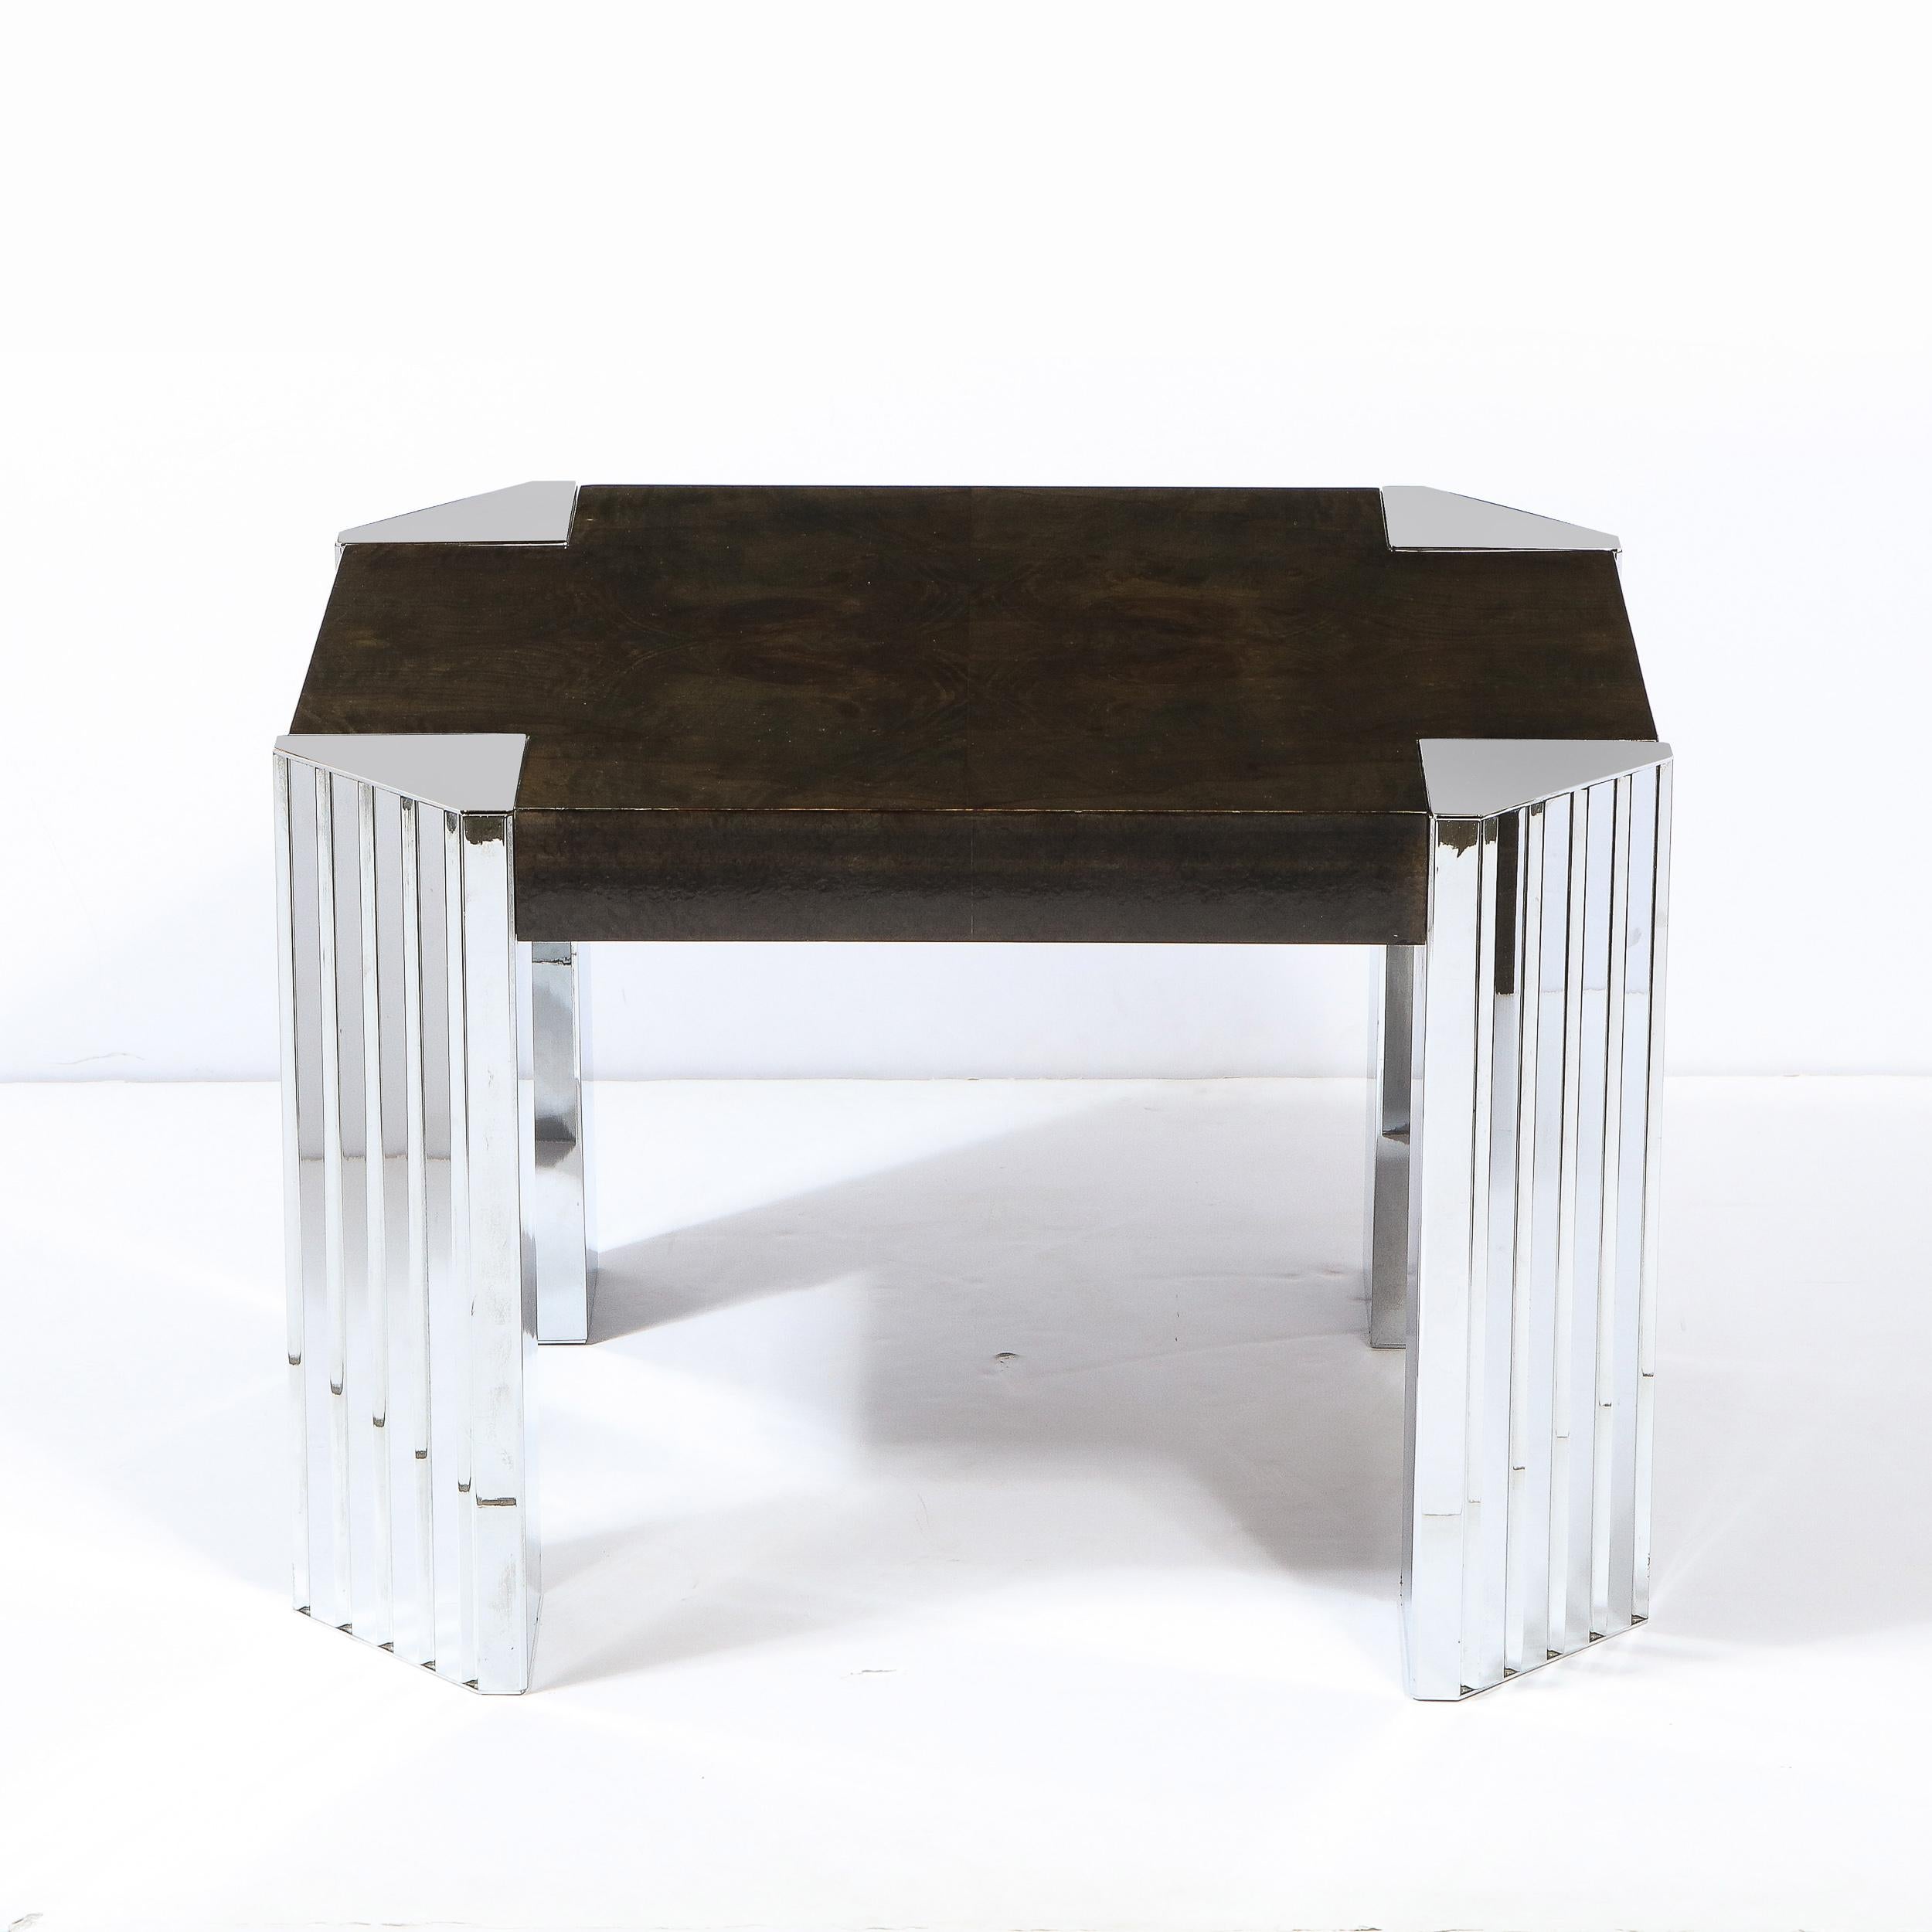 This stunning Mid-Century Modernist table in burled bookmatched and ebonized walnut was realized by in the United States circa 1970. It features beveled corners with triangular chrome inserts which attach to reeded chrome legs. With its austere form